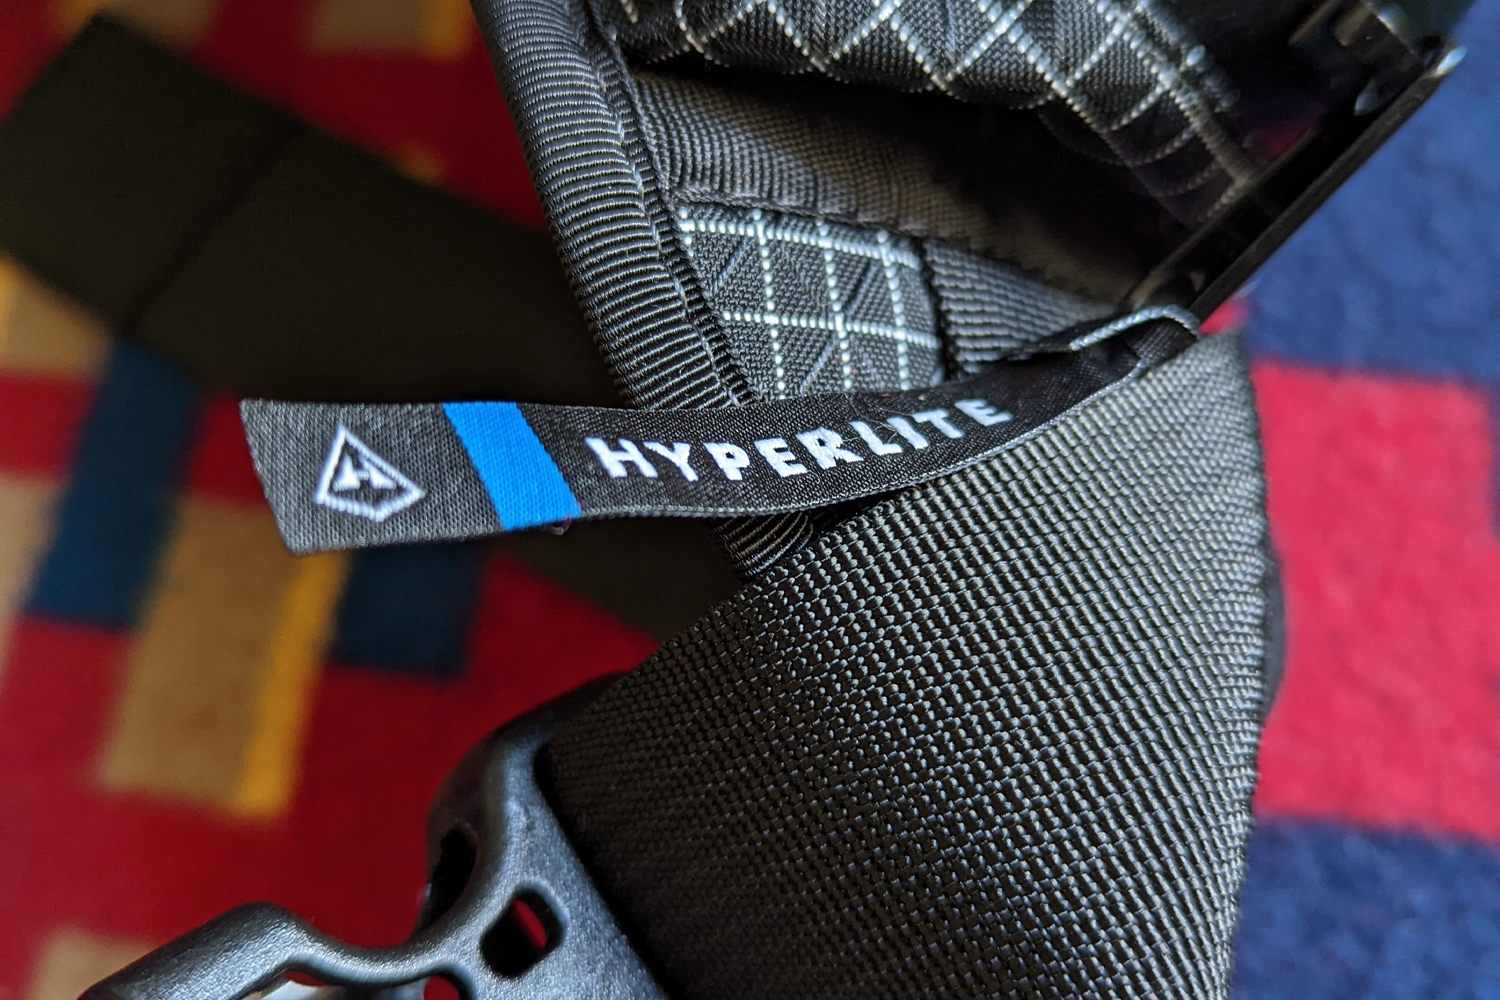 The devil is in the details of the Hyperlite Mountain Gear Southwest 2400 pack